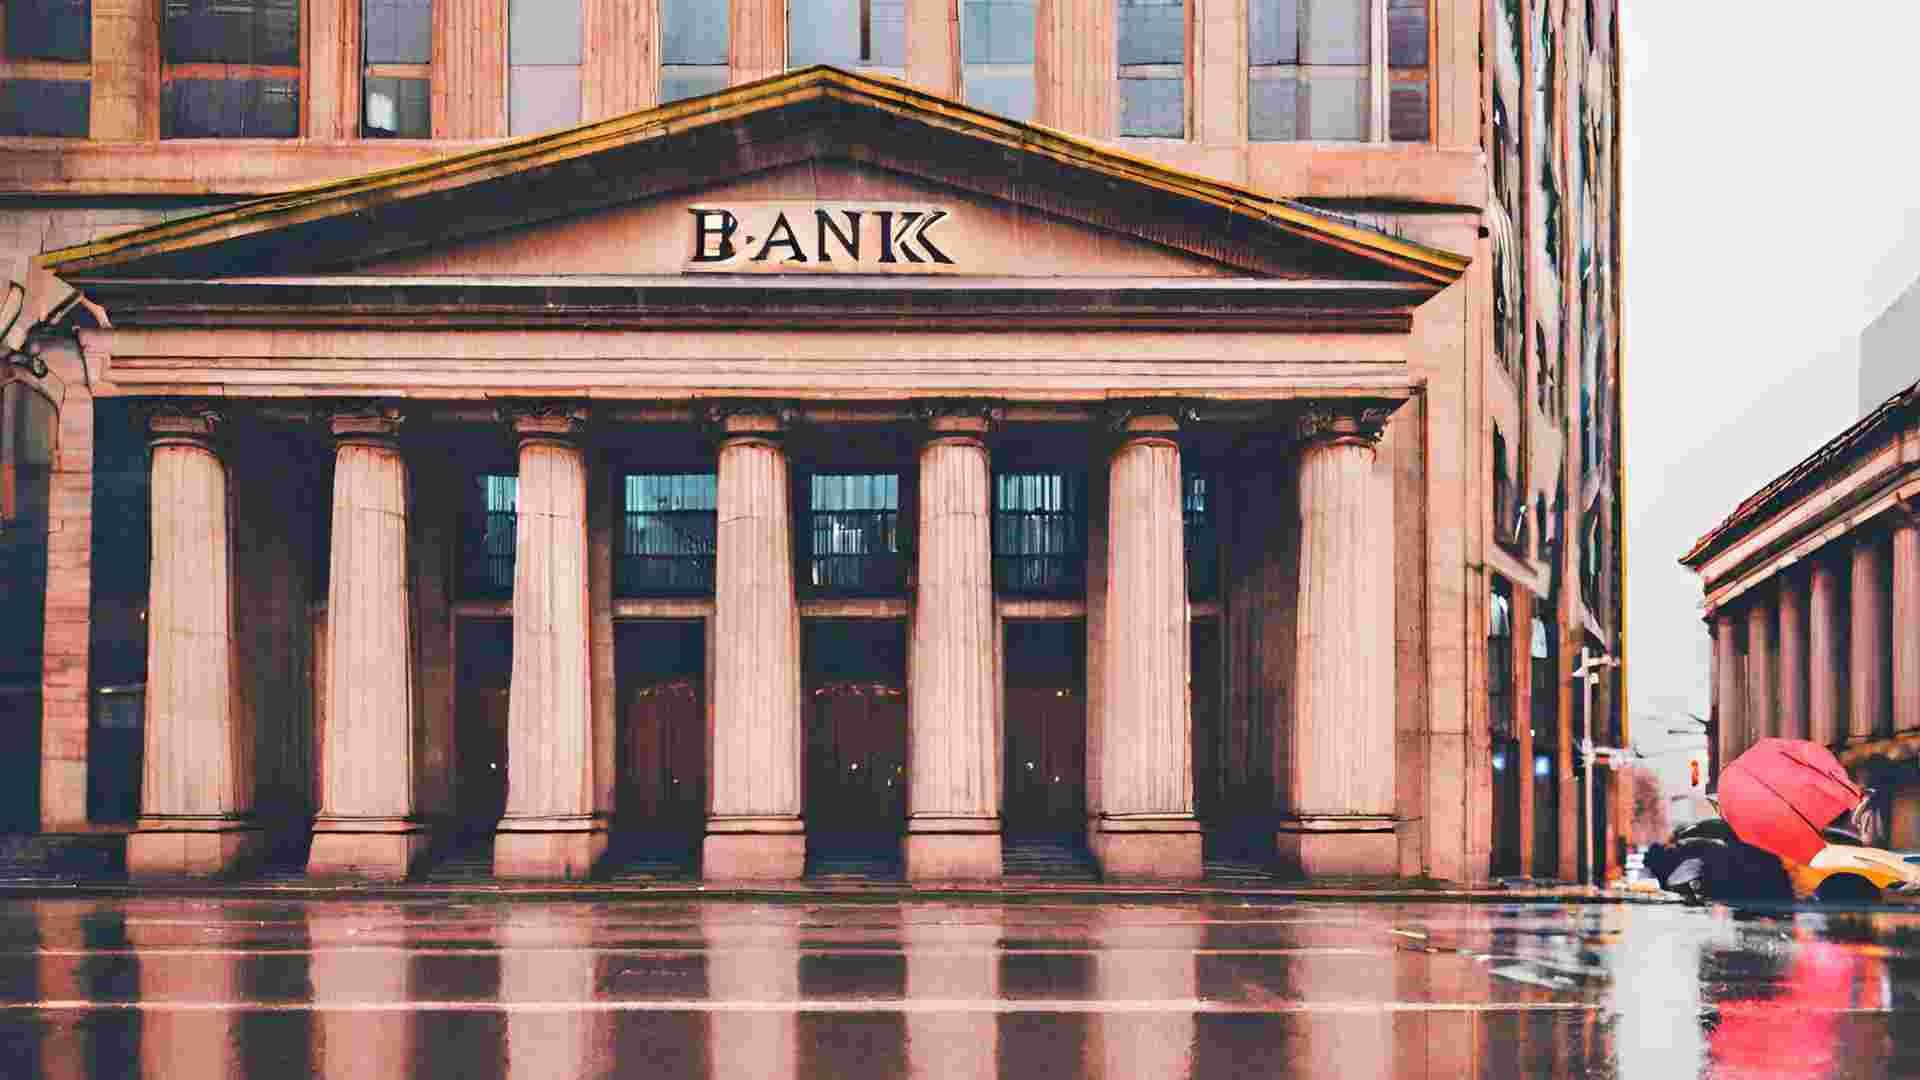 traditional ancient bank building in the middle of the city on a rainy day, nude colors